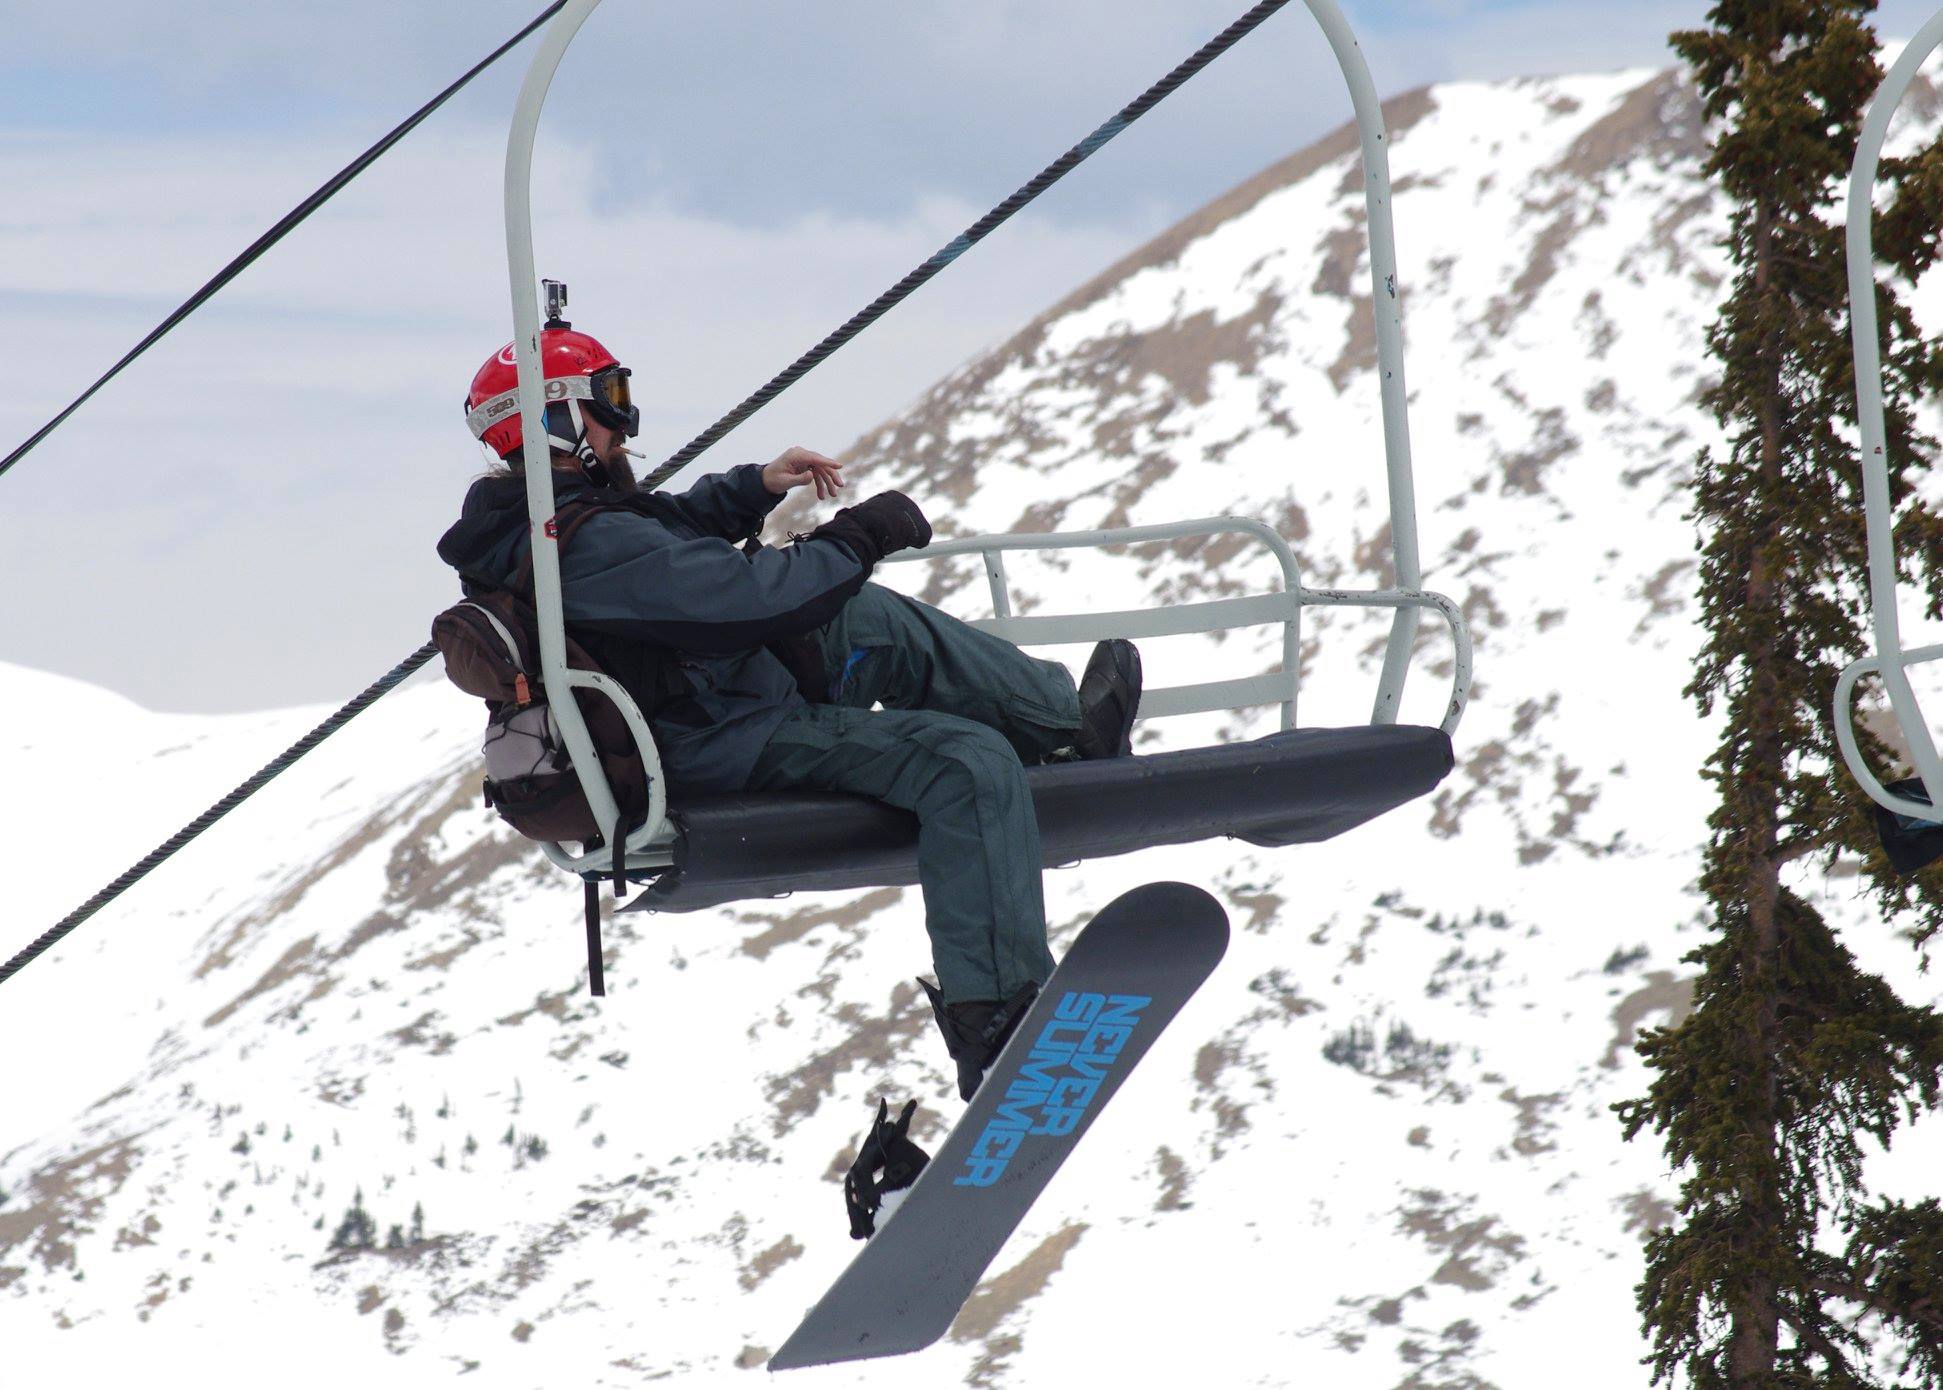 Loveland Ski Area To Sell Old Lift 1 Chairs Via Lottery System